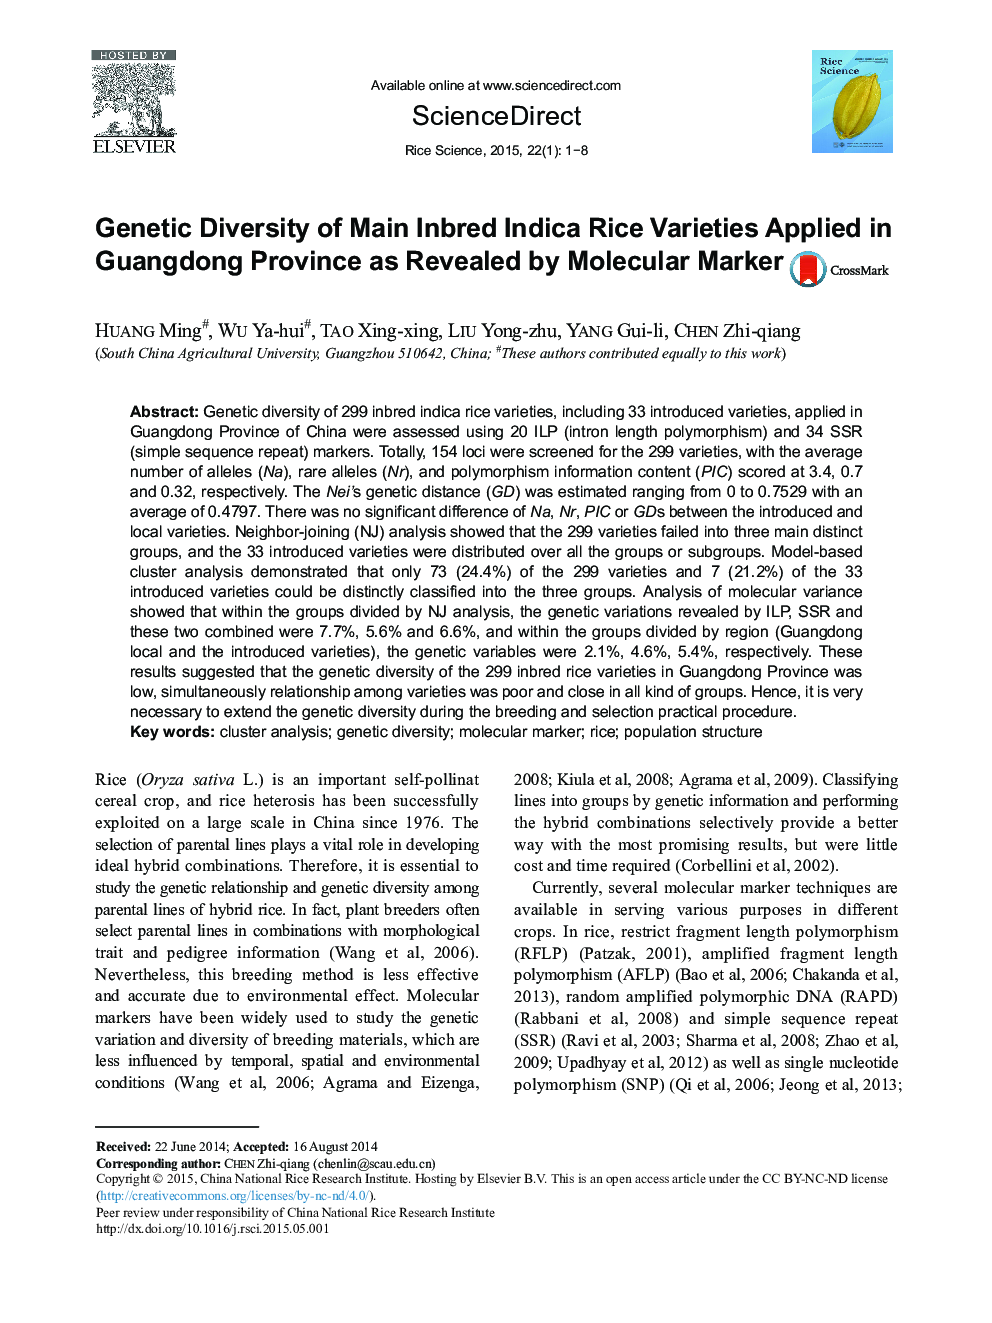 Genetic Diversity of Main Inbred Indica Rice Varieties Applied in Guangdong Province as Revealed by Molecular Marker 